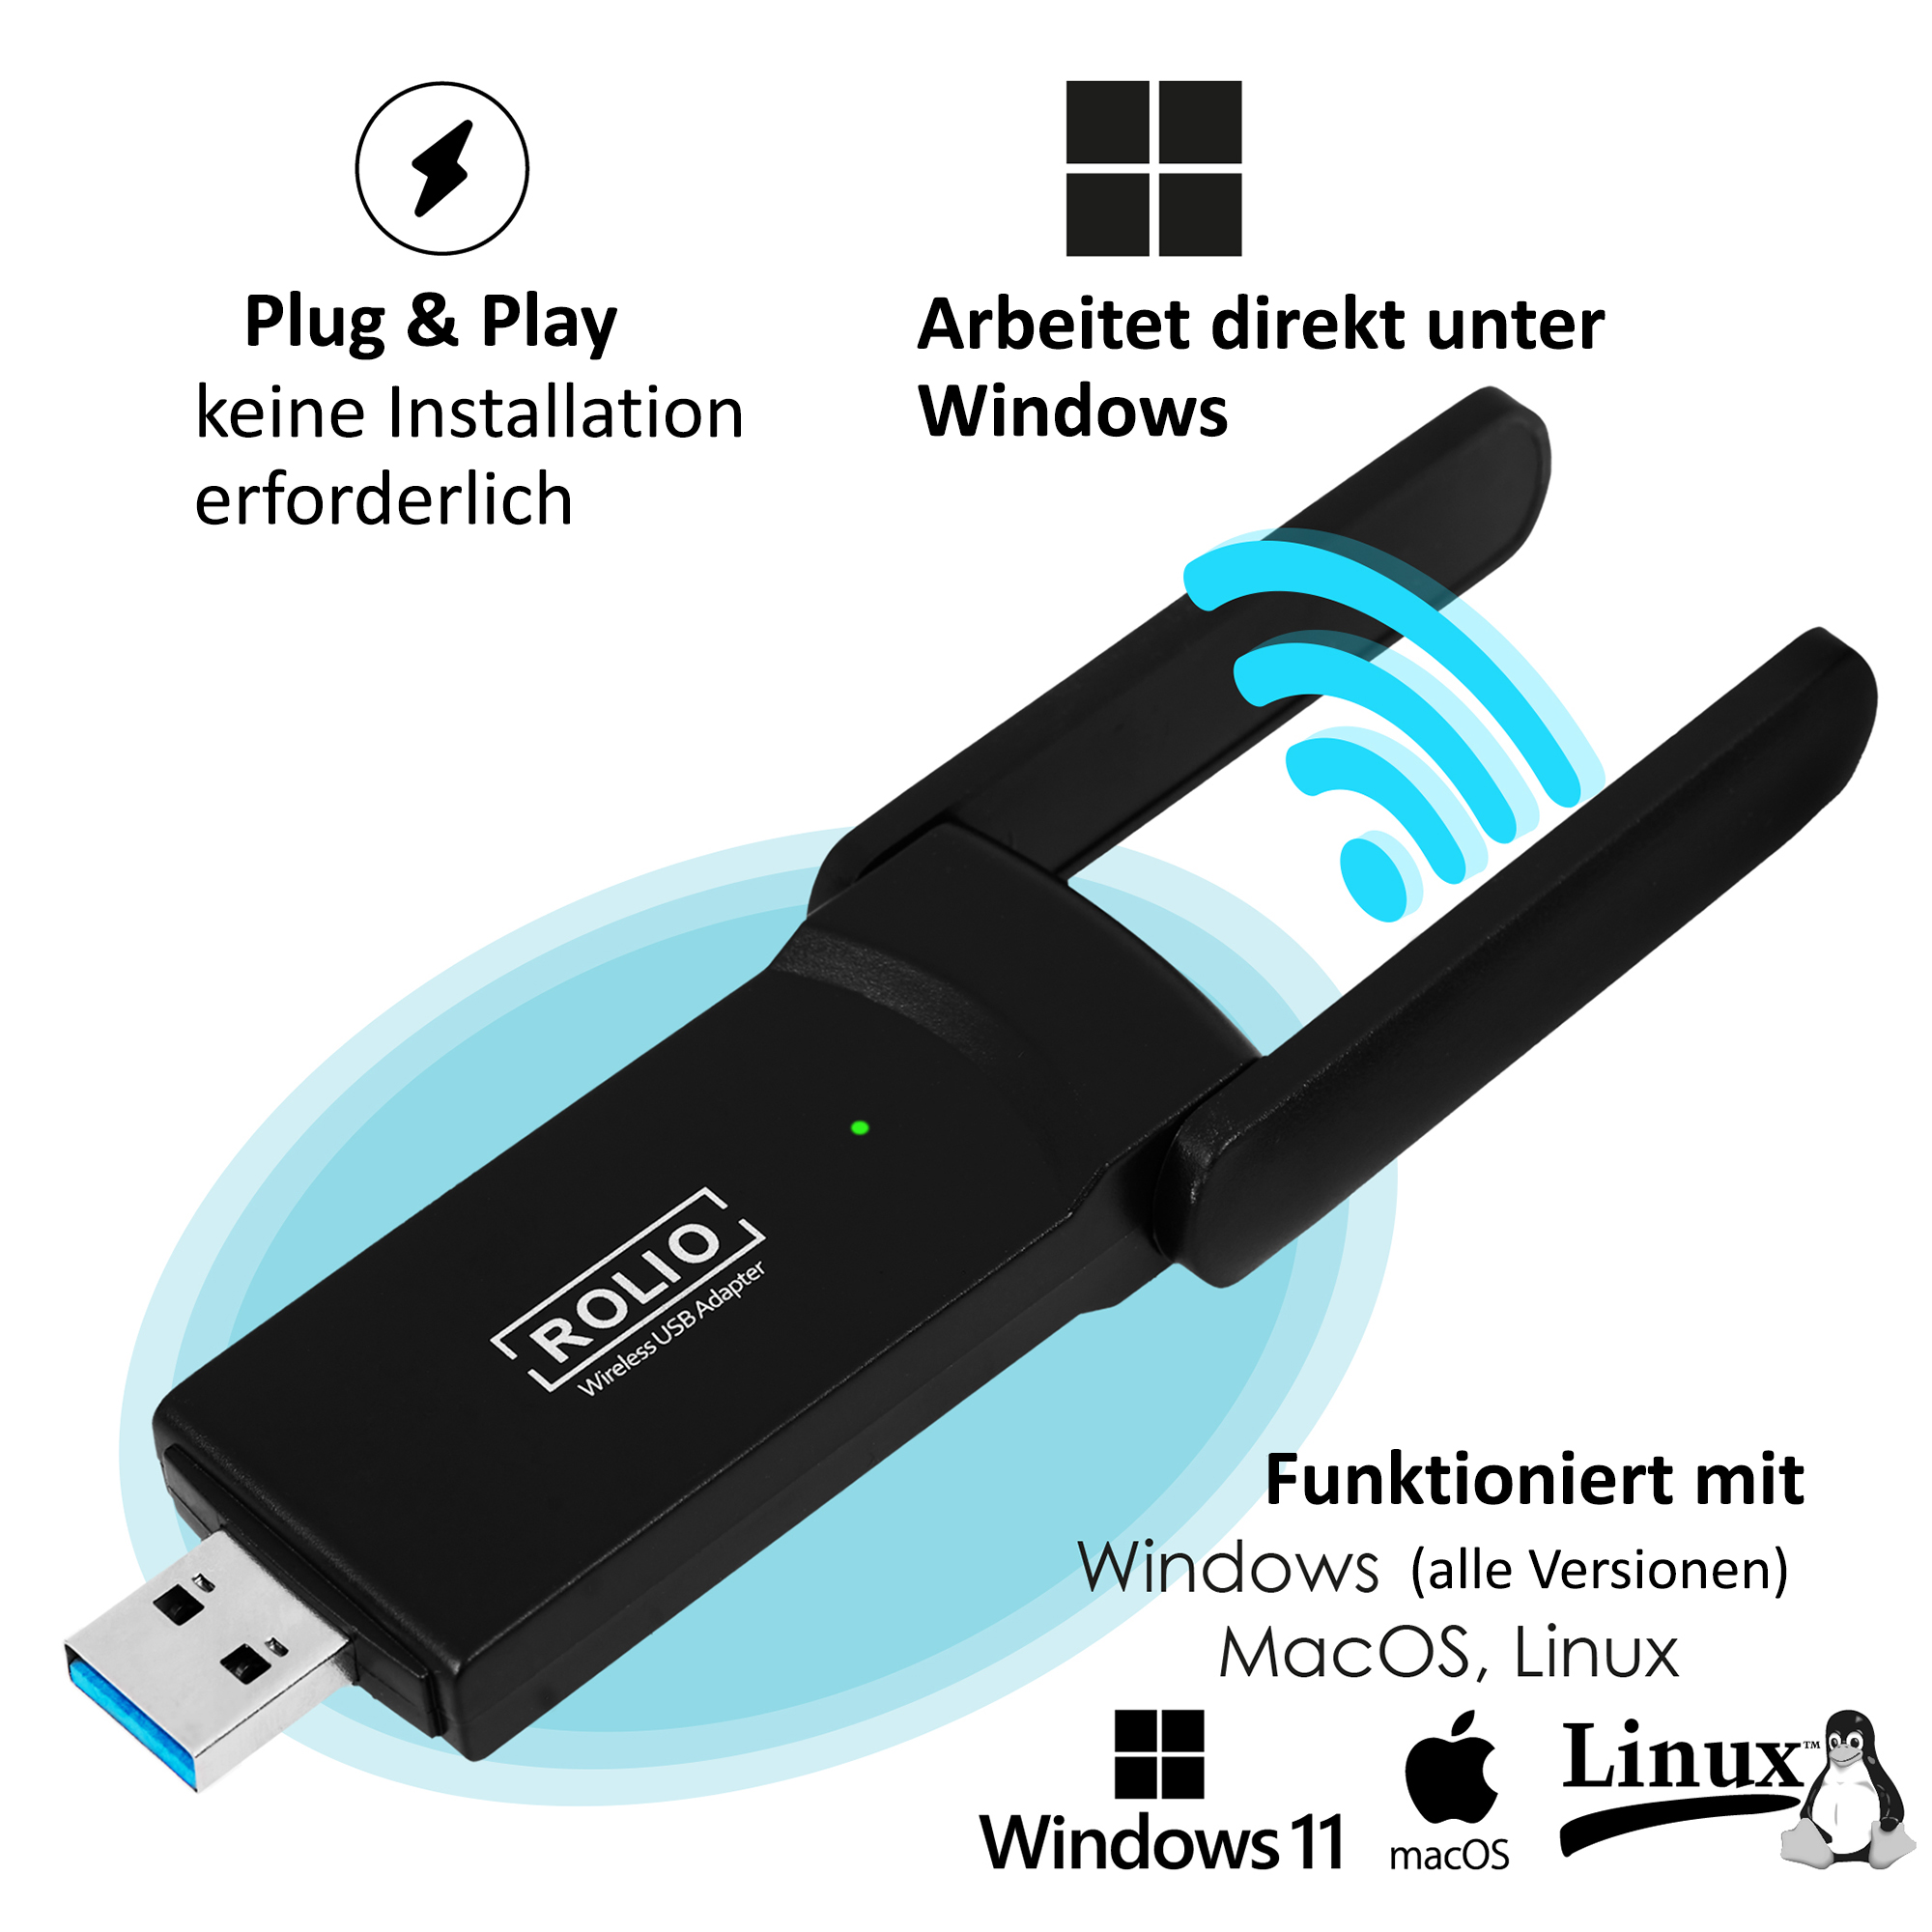 Adapter 1200Mbps WiFi Antenne WLAN Dual ROLIO USB